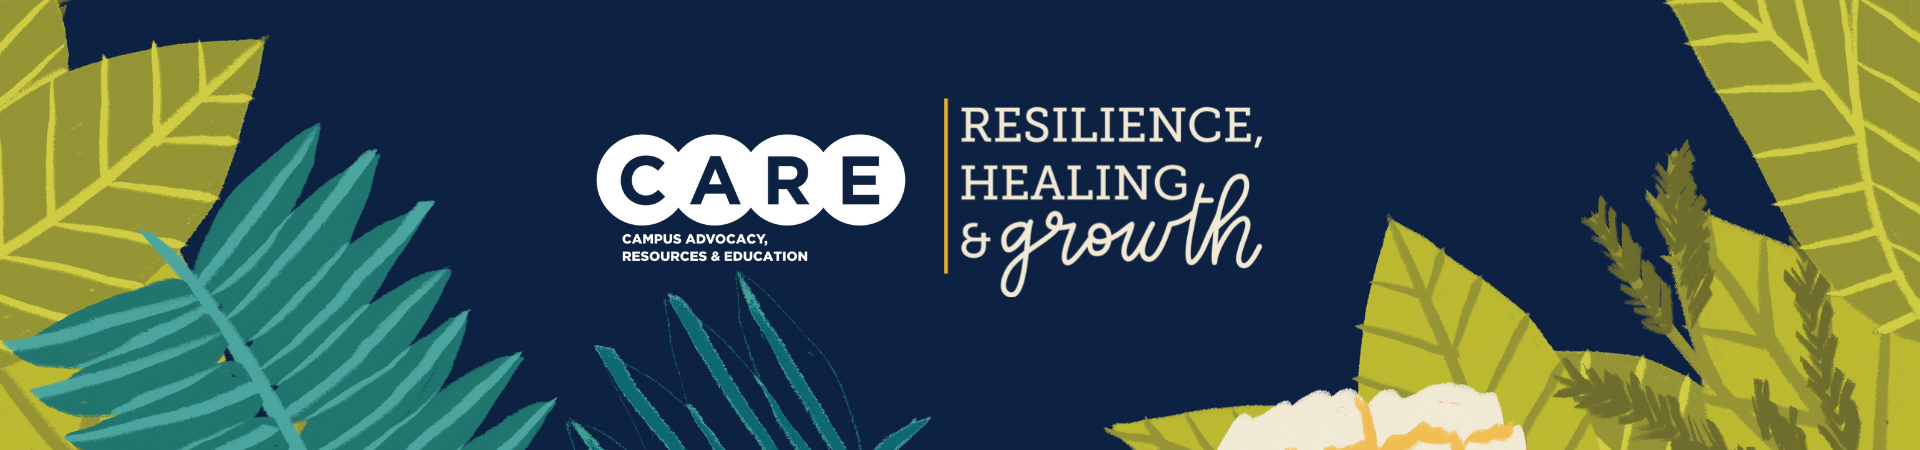 A welcome banner that contains the CARE logo along with the phrase "resilience, healing, & growth"